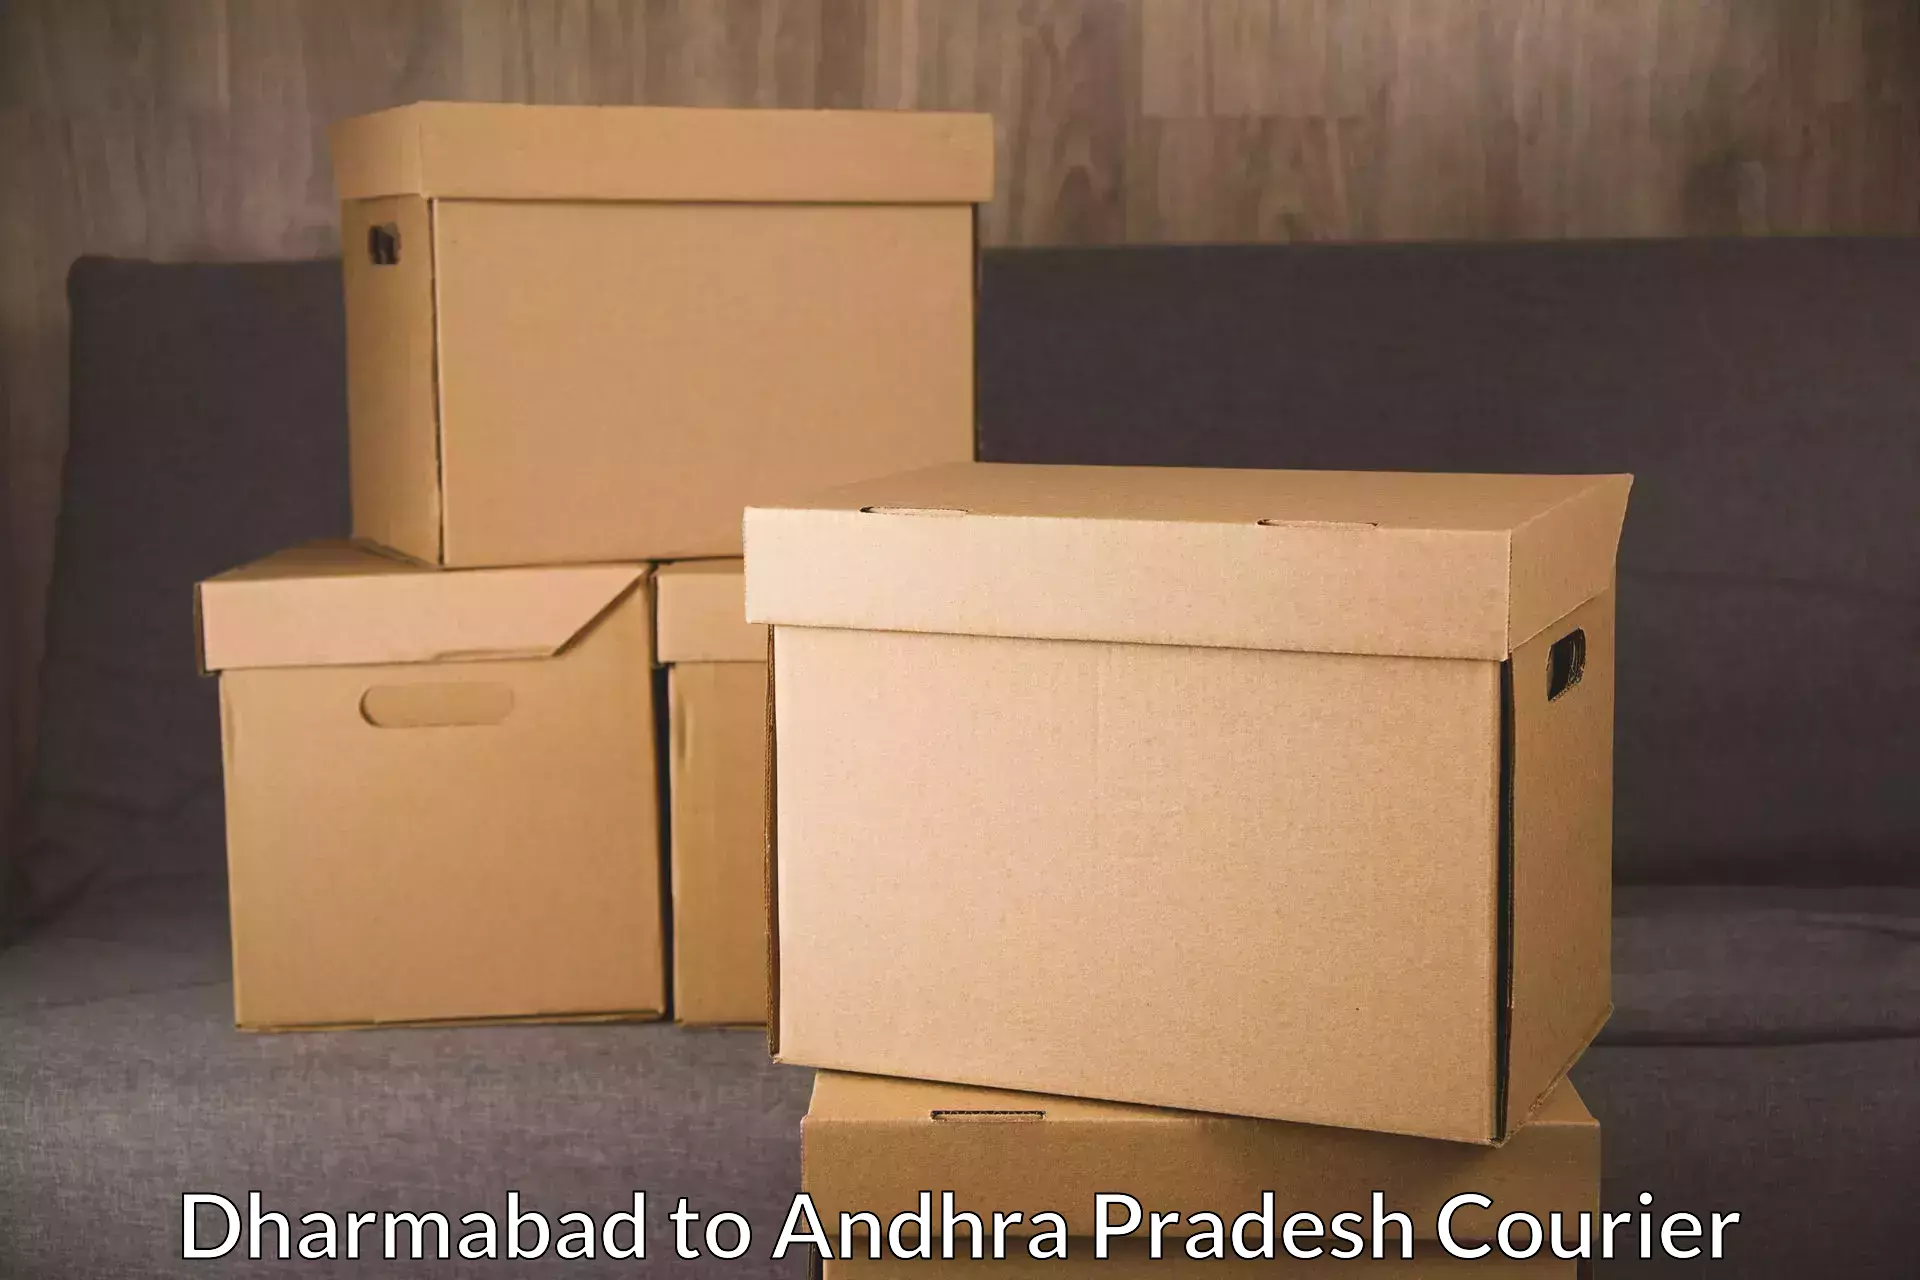 Courier service partnerships Dharmabad to Naupada